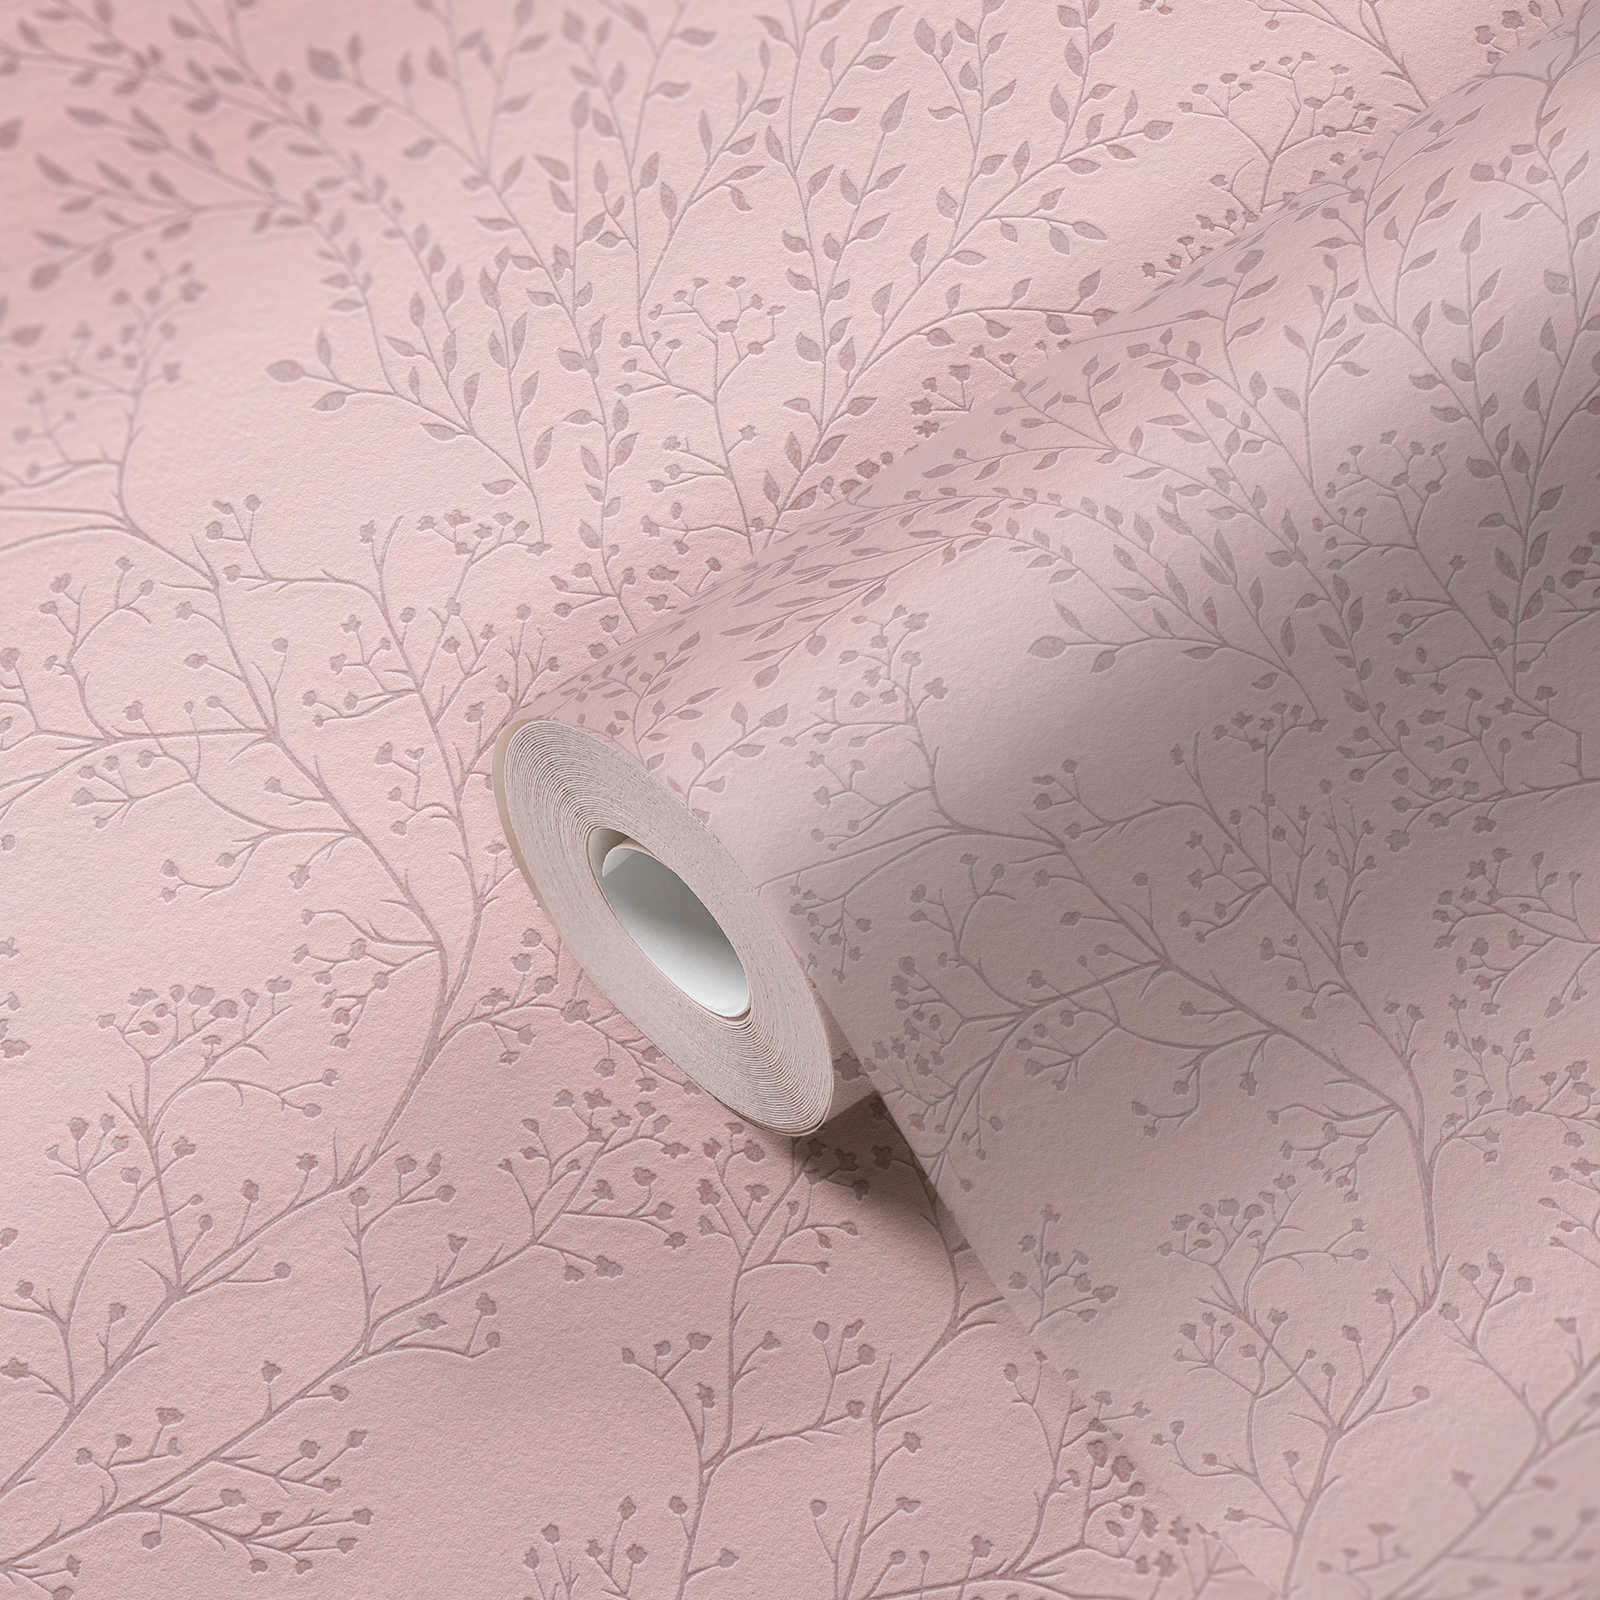             Plain wallpaper pink with leaves pattern, gloss & texture effect
        